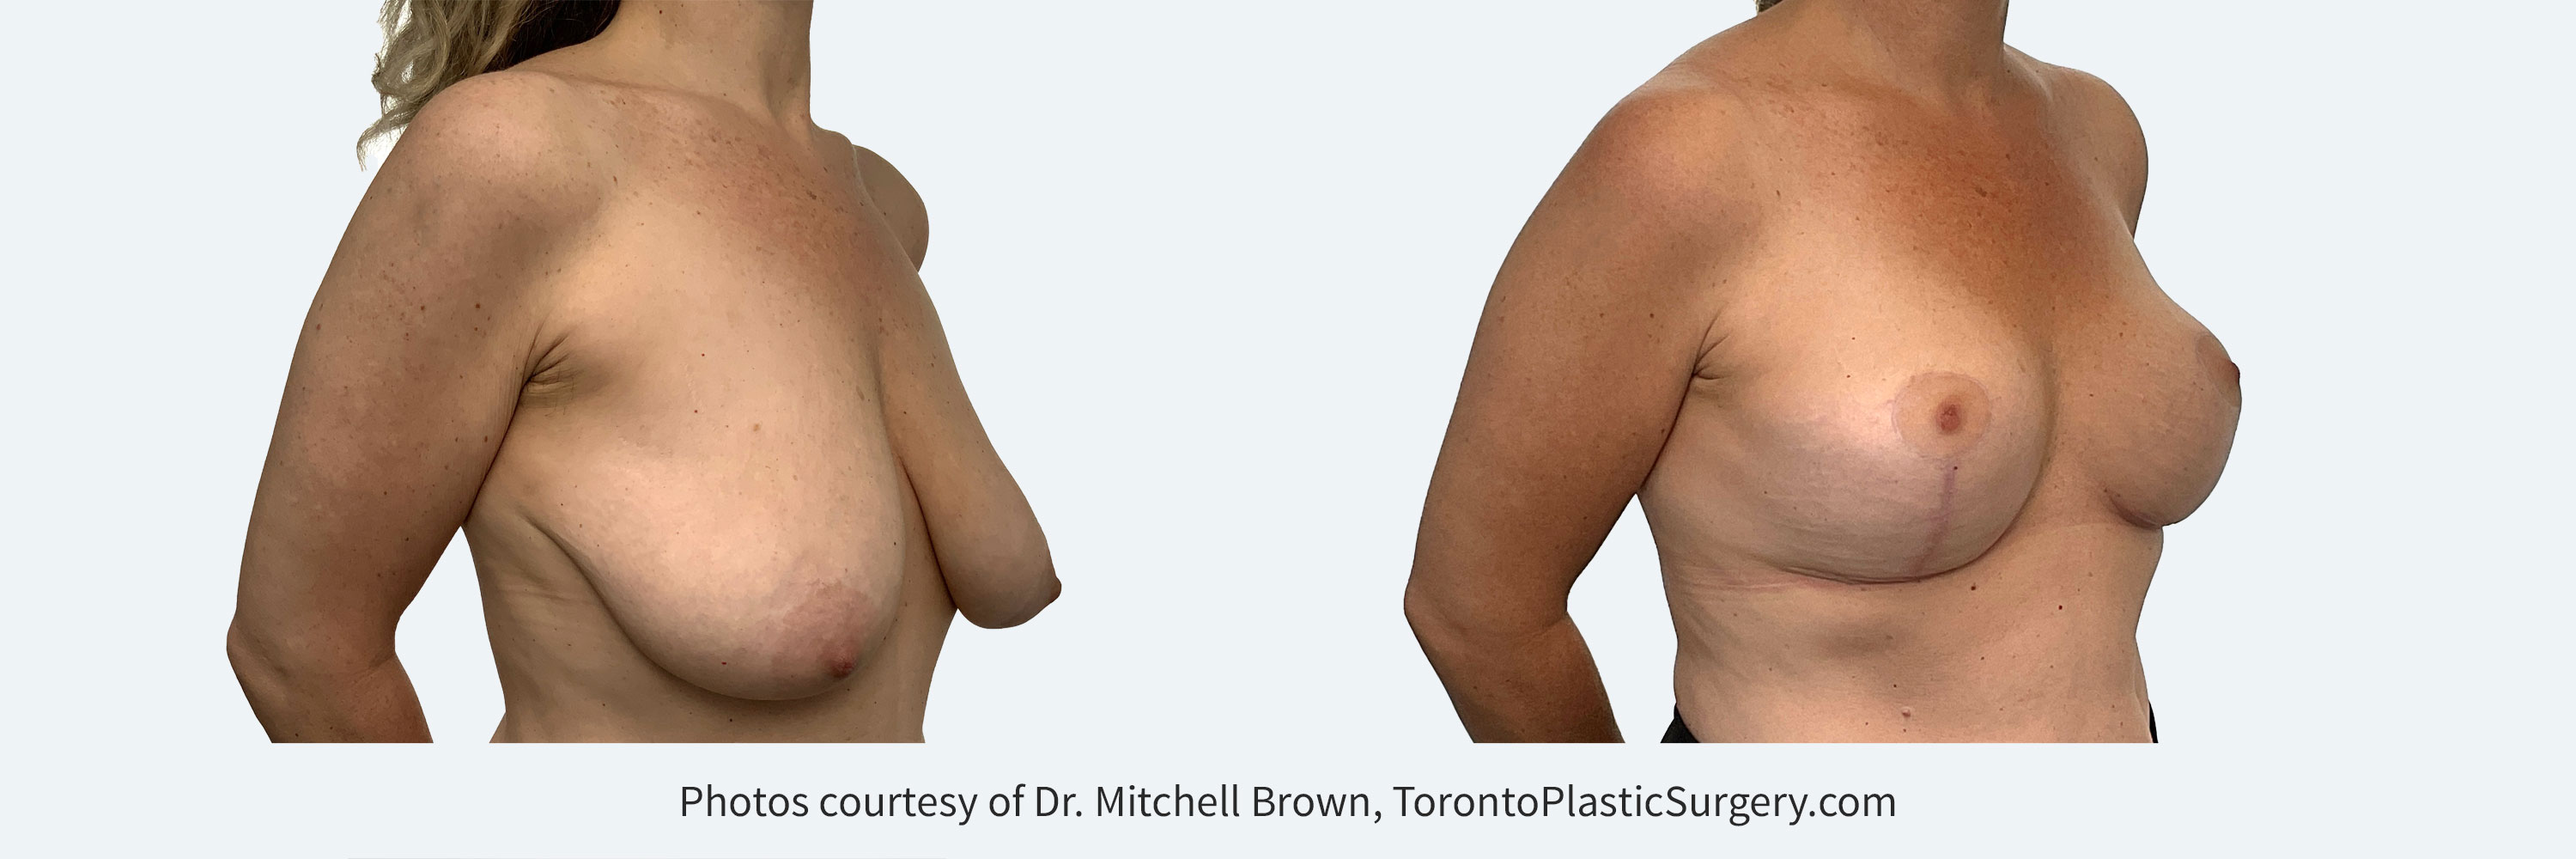 Breast Lift, Before and After 6 Months